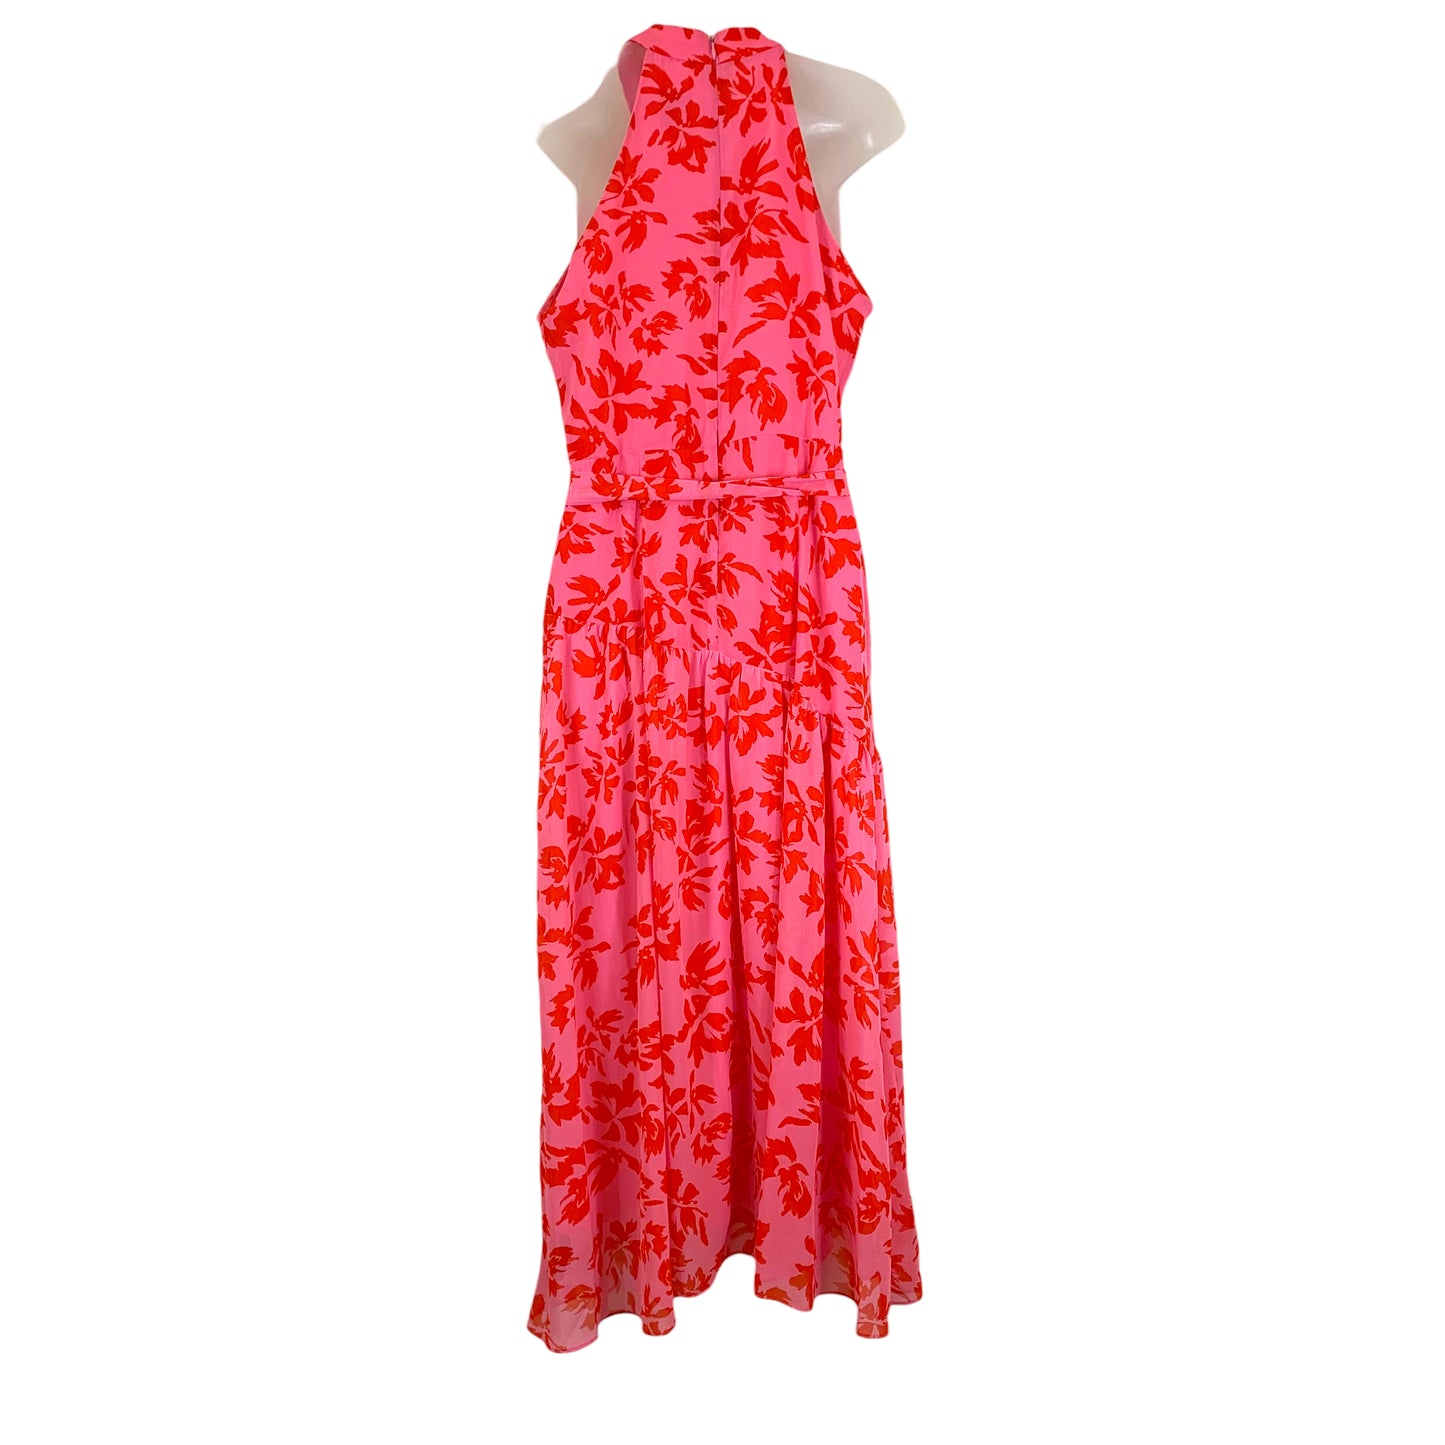 Dress Casual Maxi By Taylor Size: S